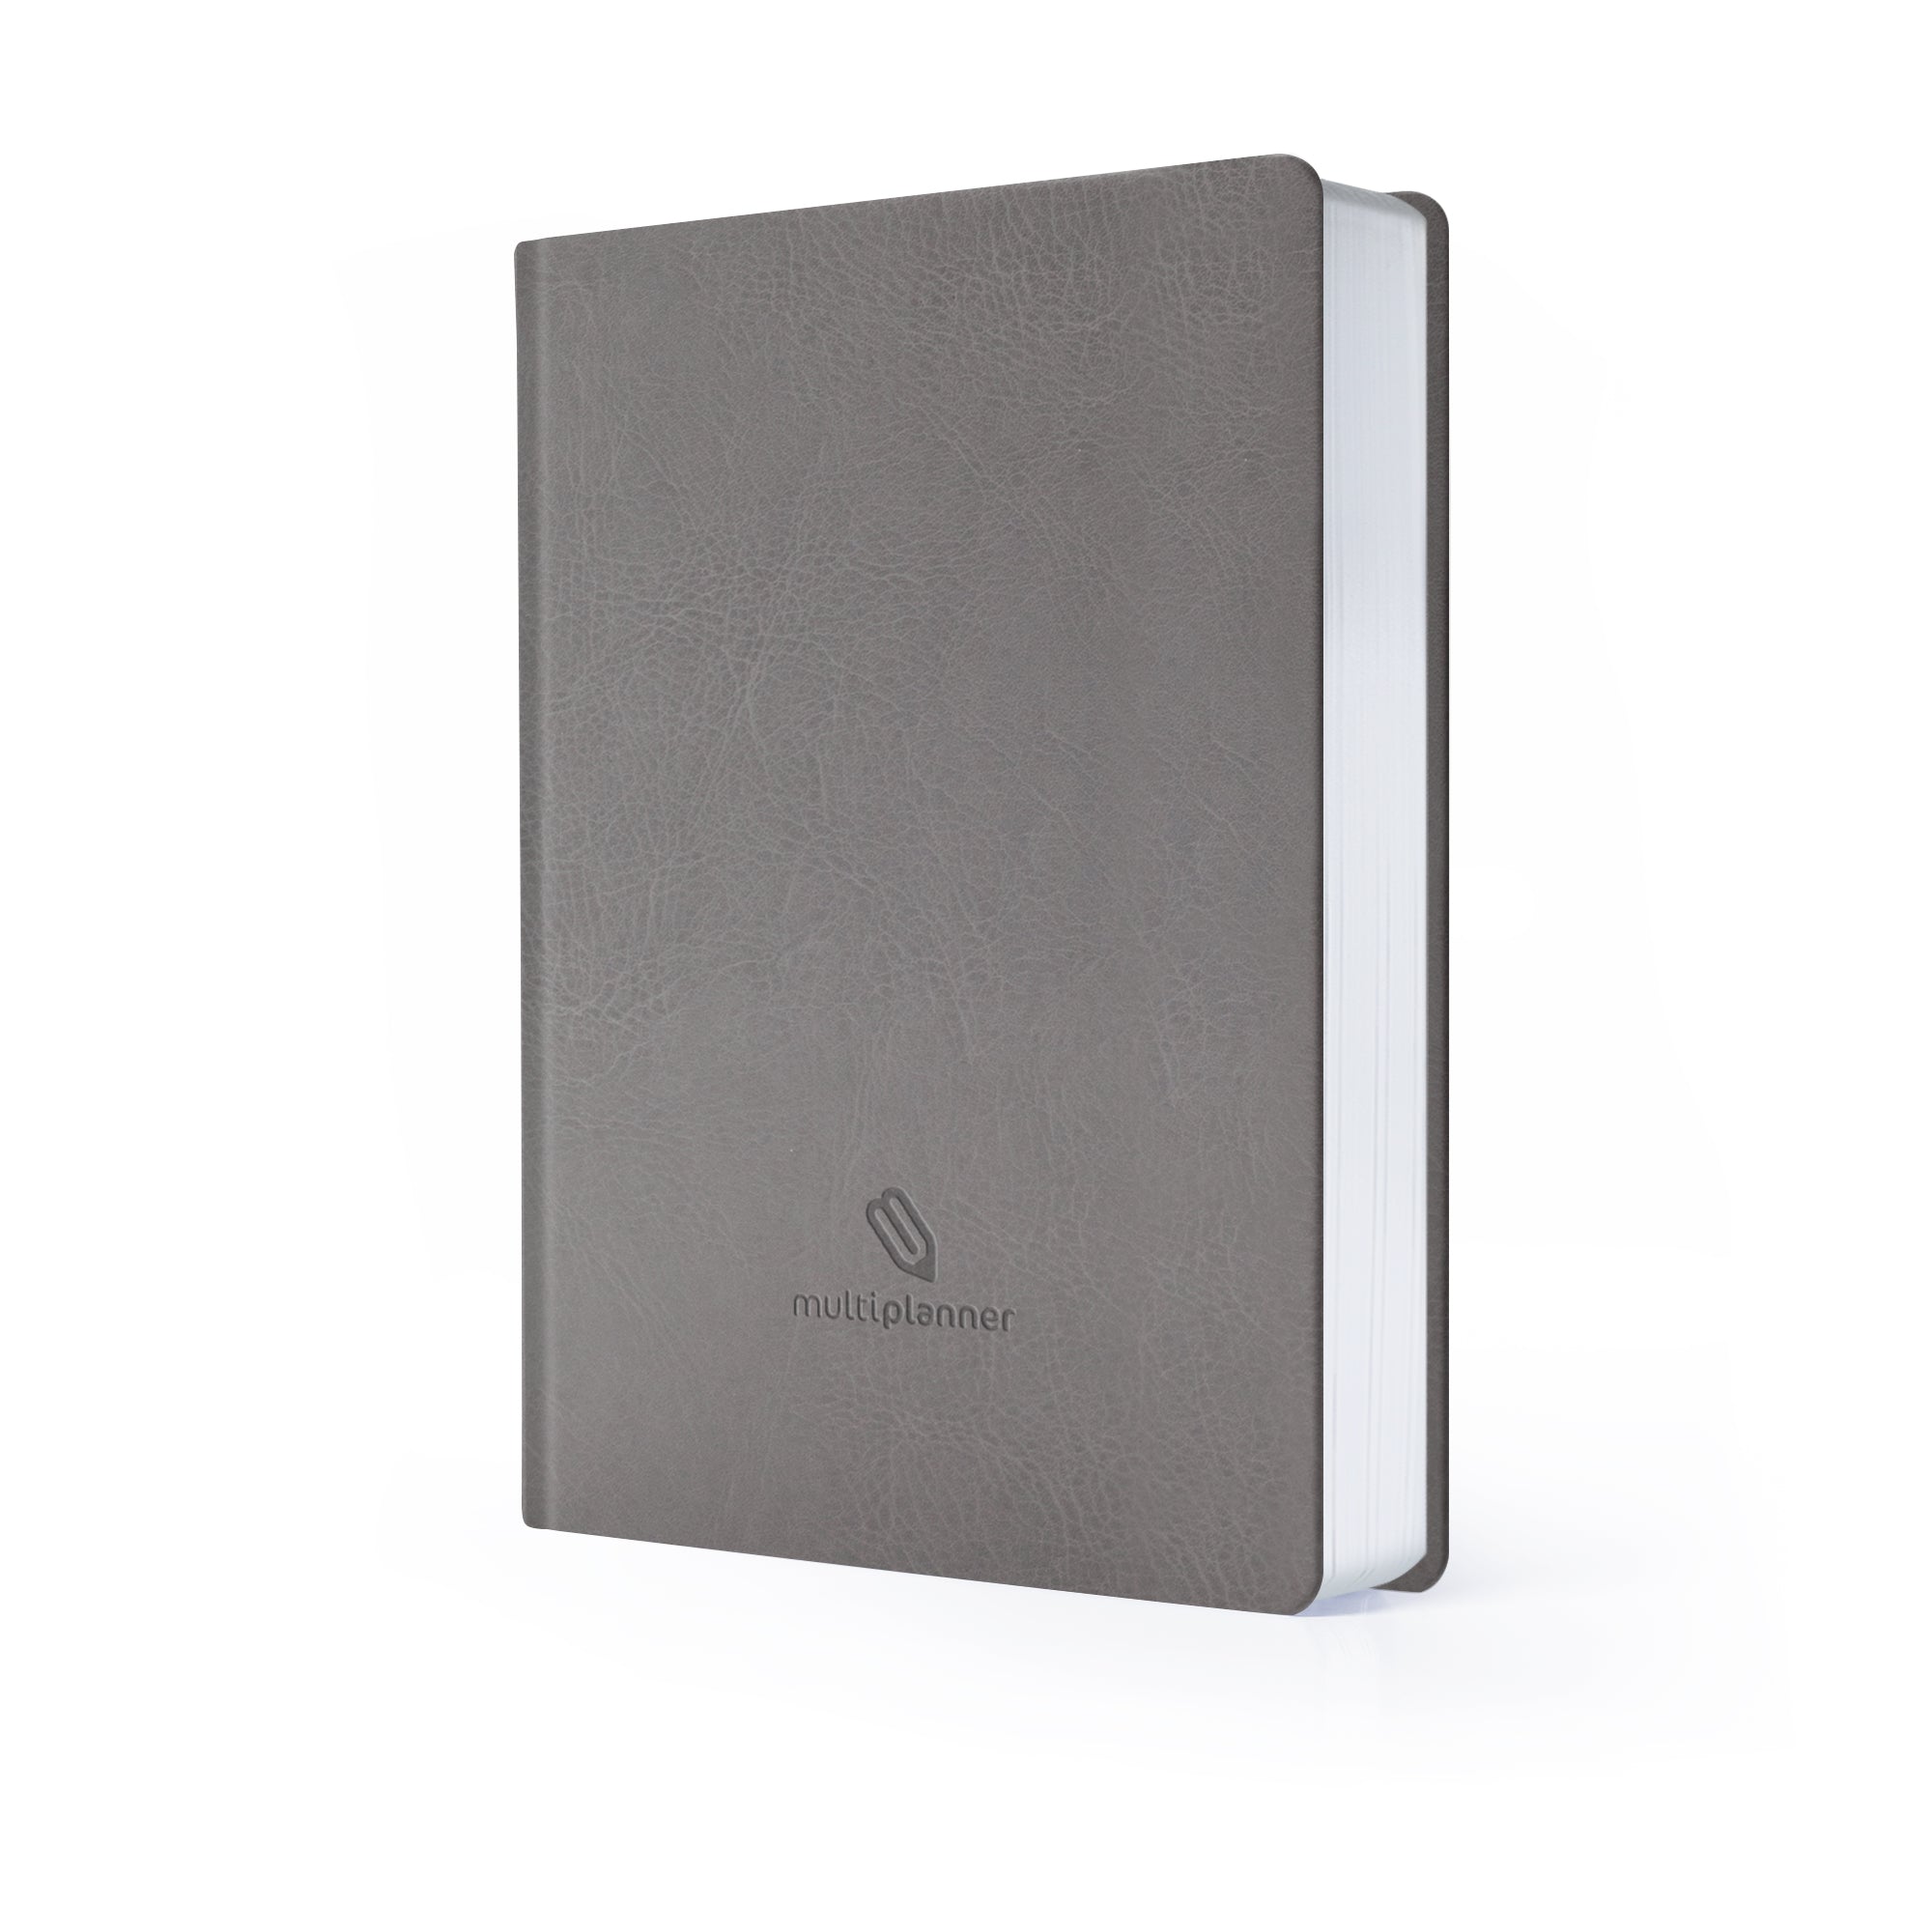 Image shows a Grey Classic MultiPlanner